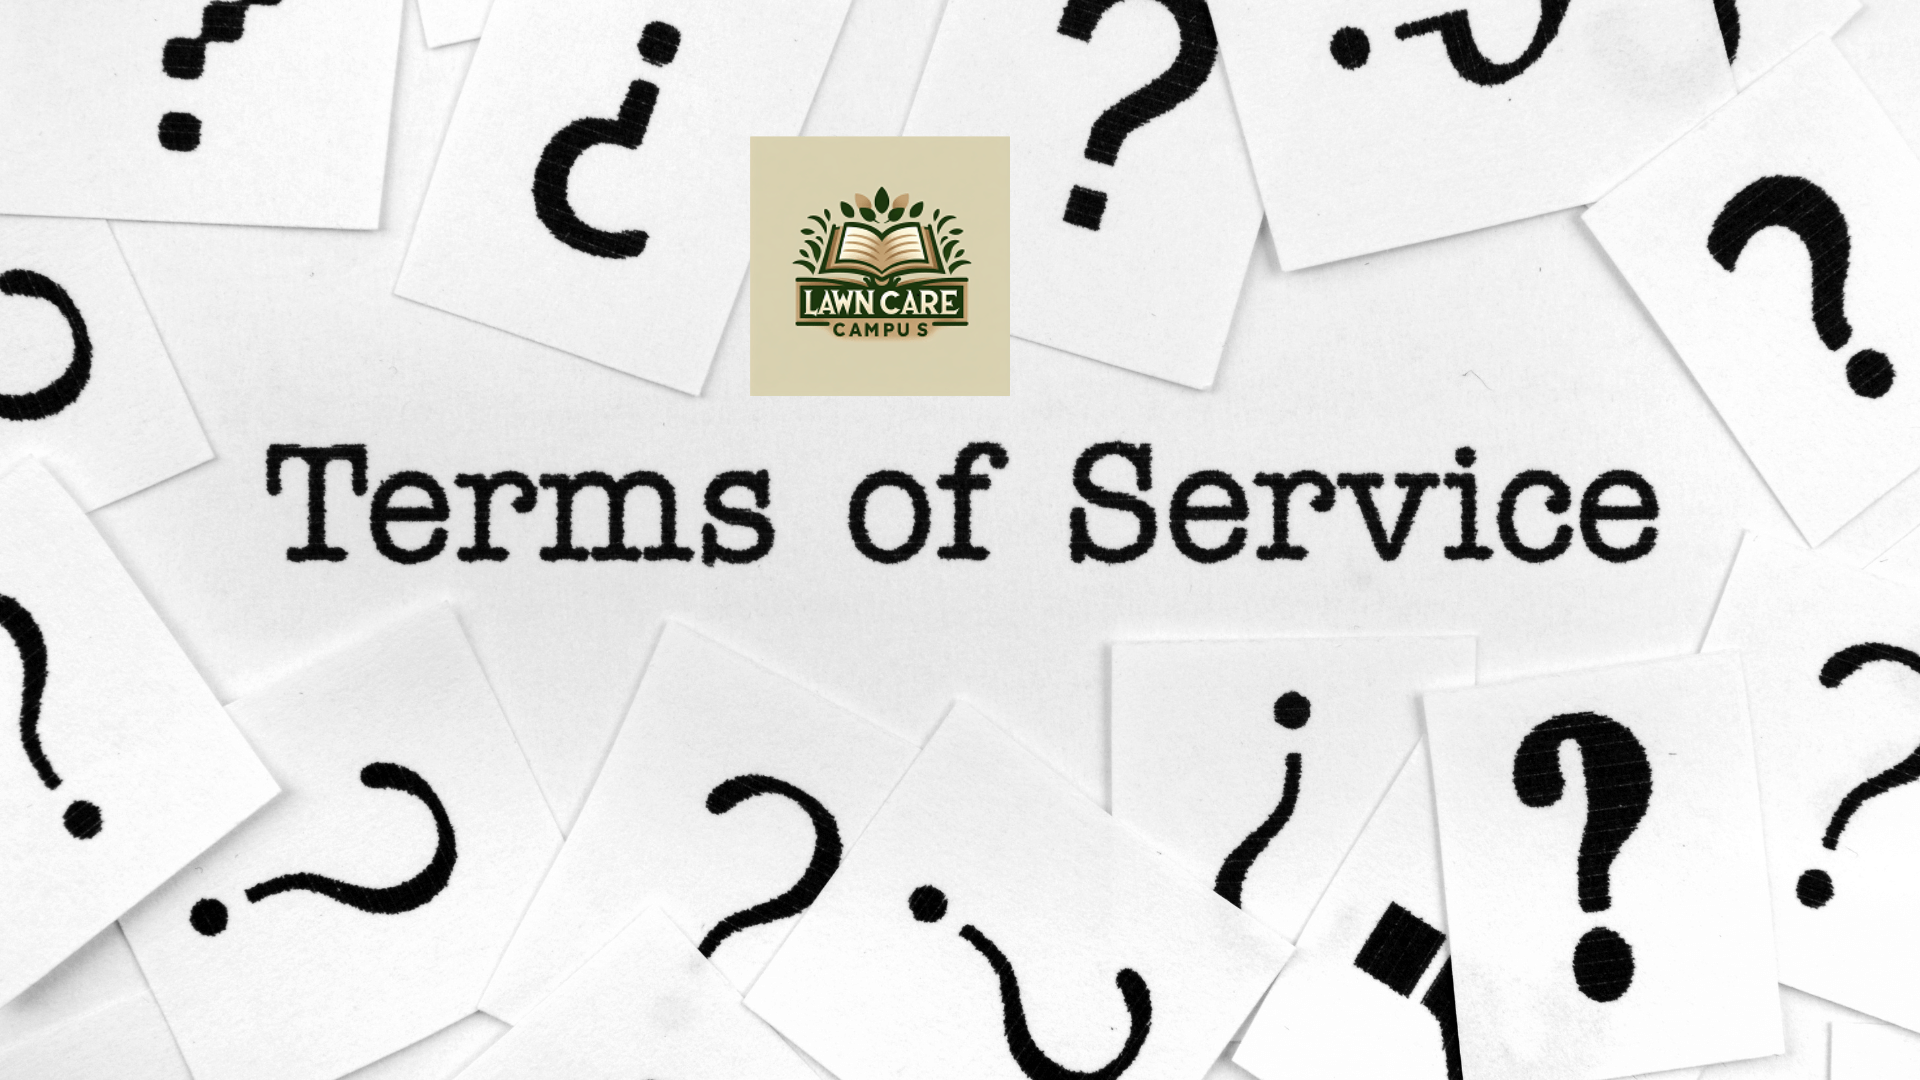 Terms of Service for Lawn Care Campus